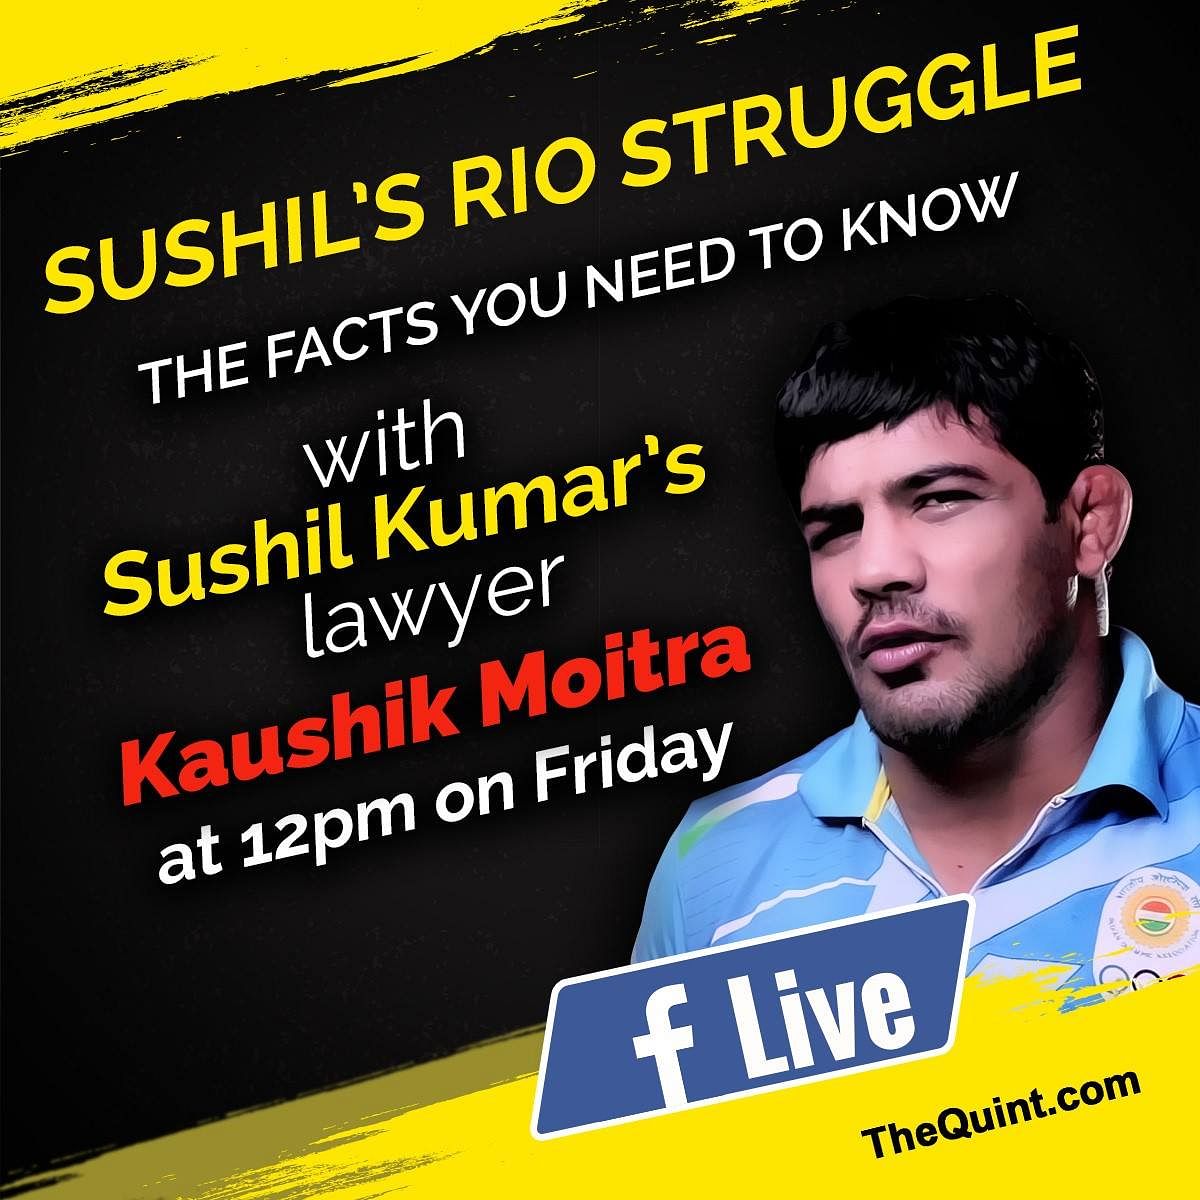 The truth and hard facts behind the  flashlights and controversy of Sushil Kumar’s Rio exclusion.